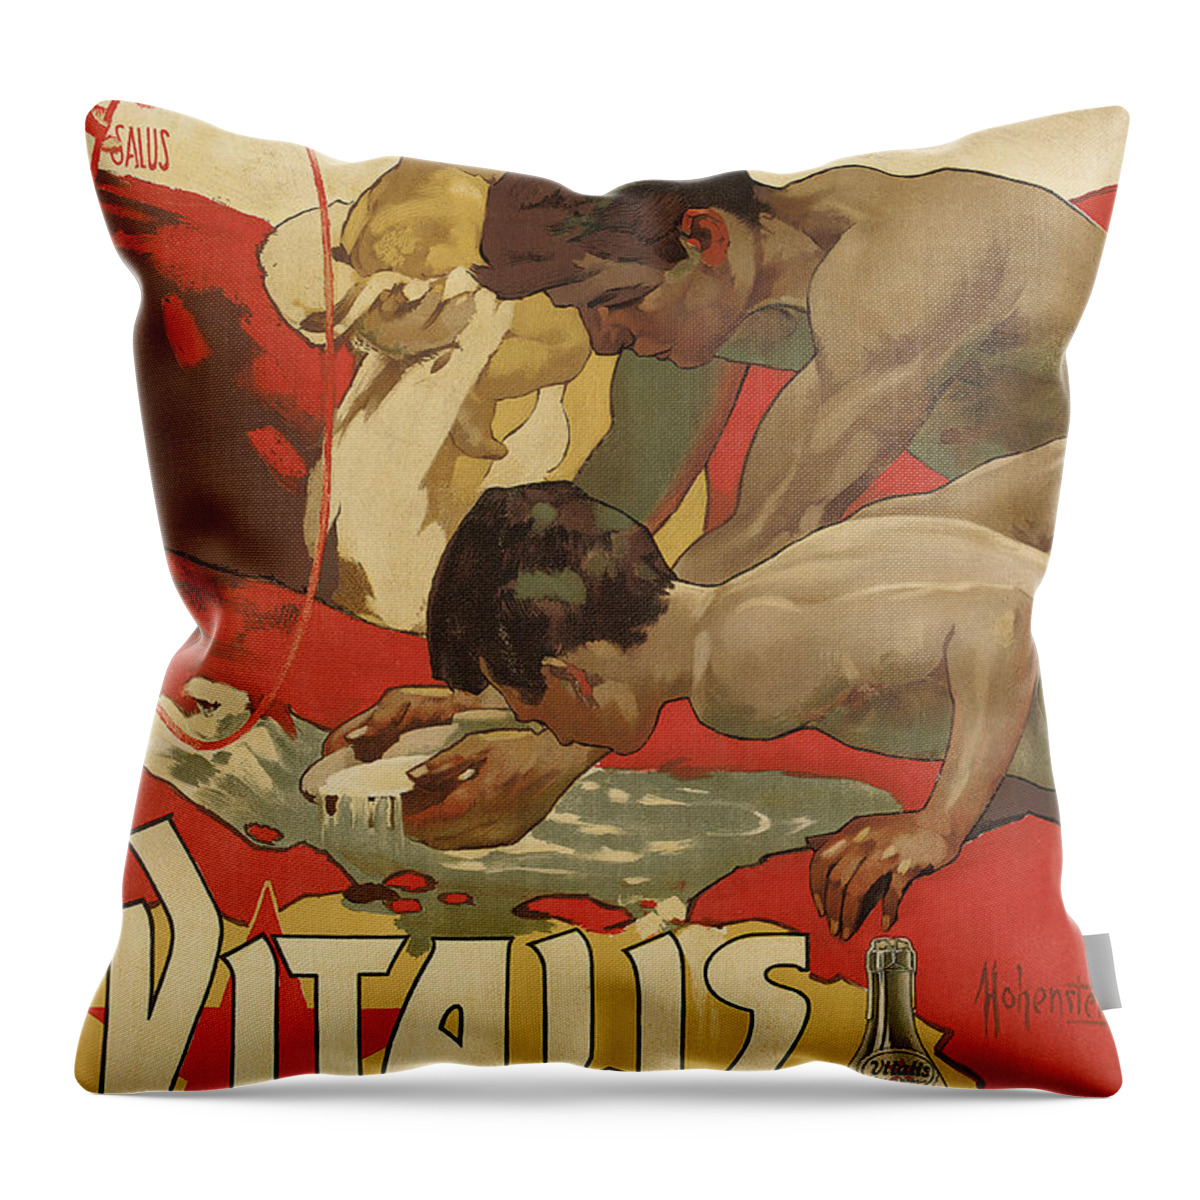 Vitalis Throw Pillow featuring the painting Vintage poster for the mineral water Vitalis, 1895 by Adolfo Hohenstein